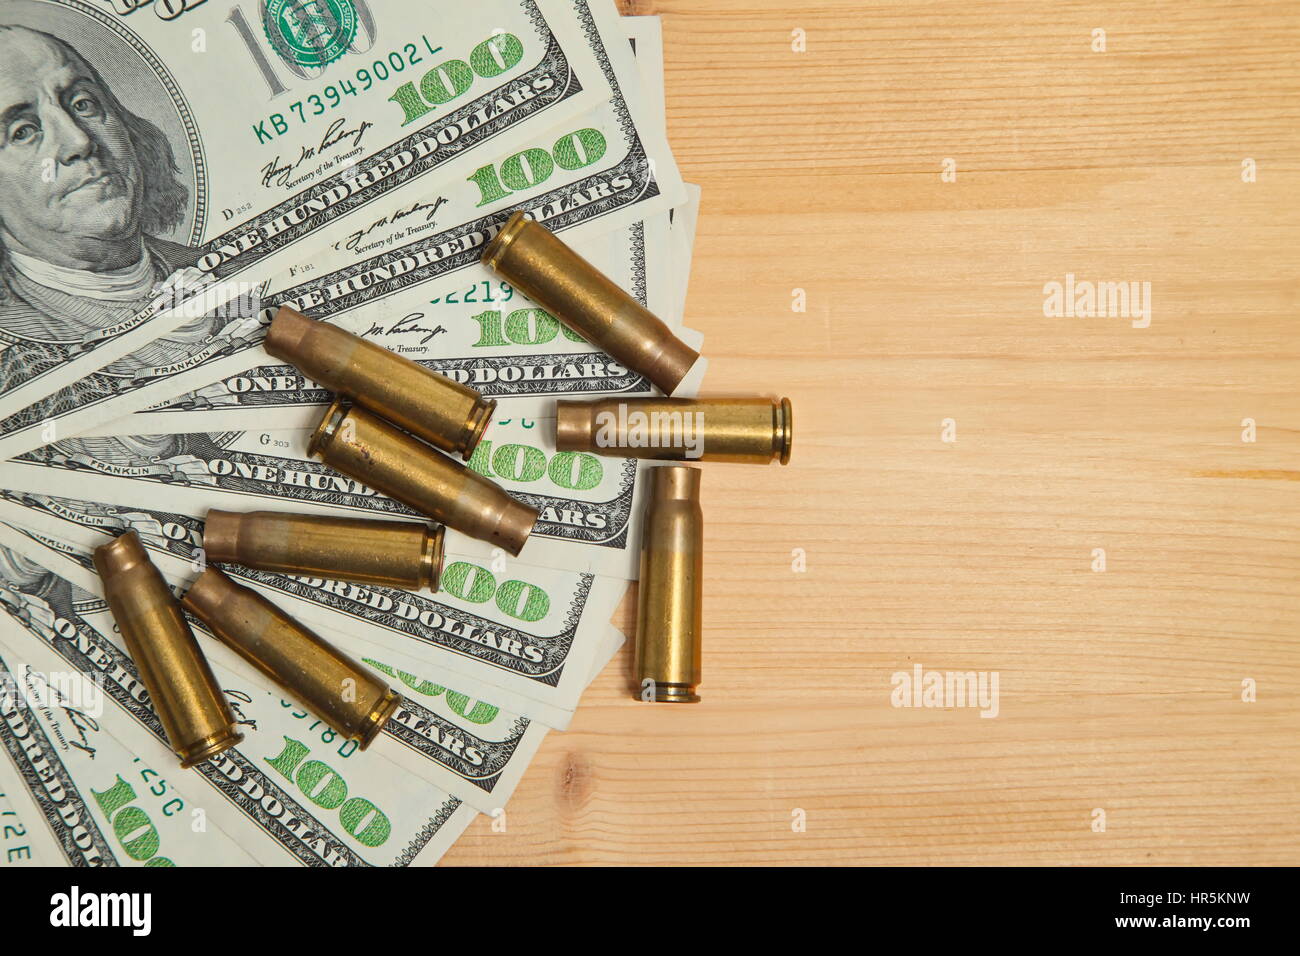 The used bullet shells and dollars Stock Photo